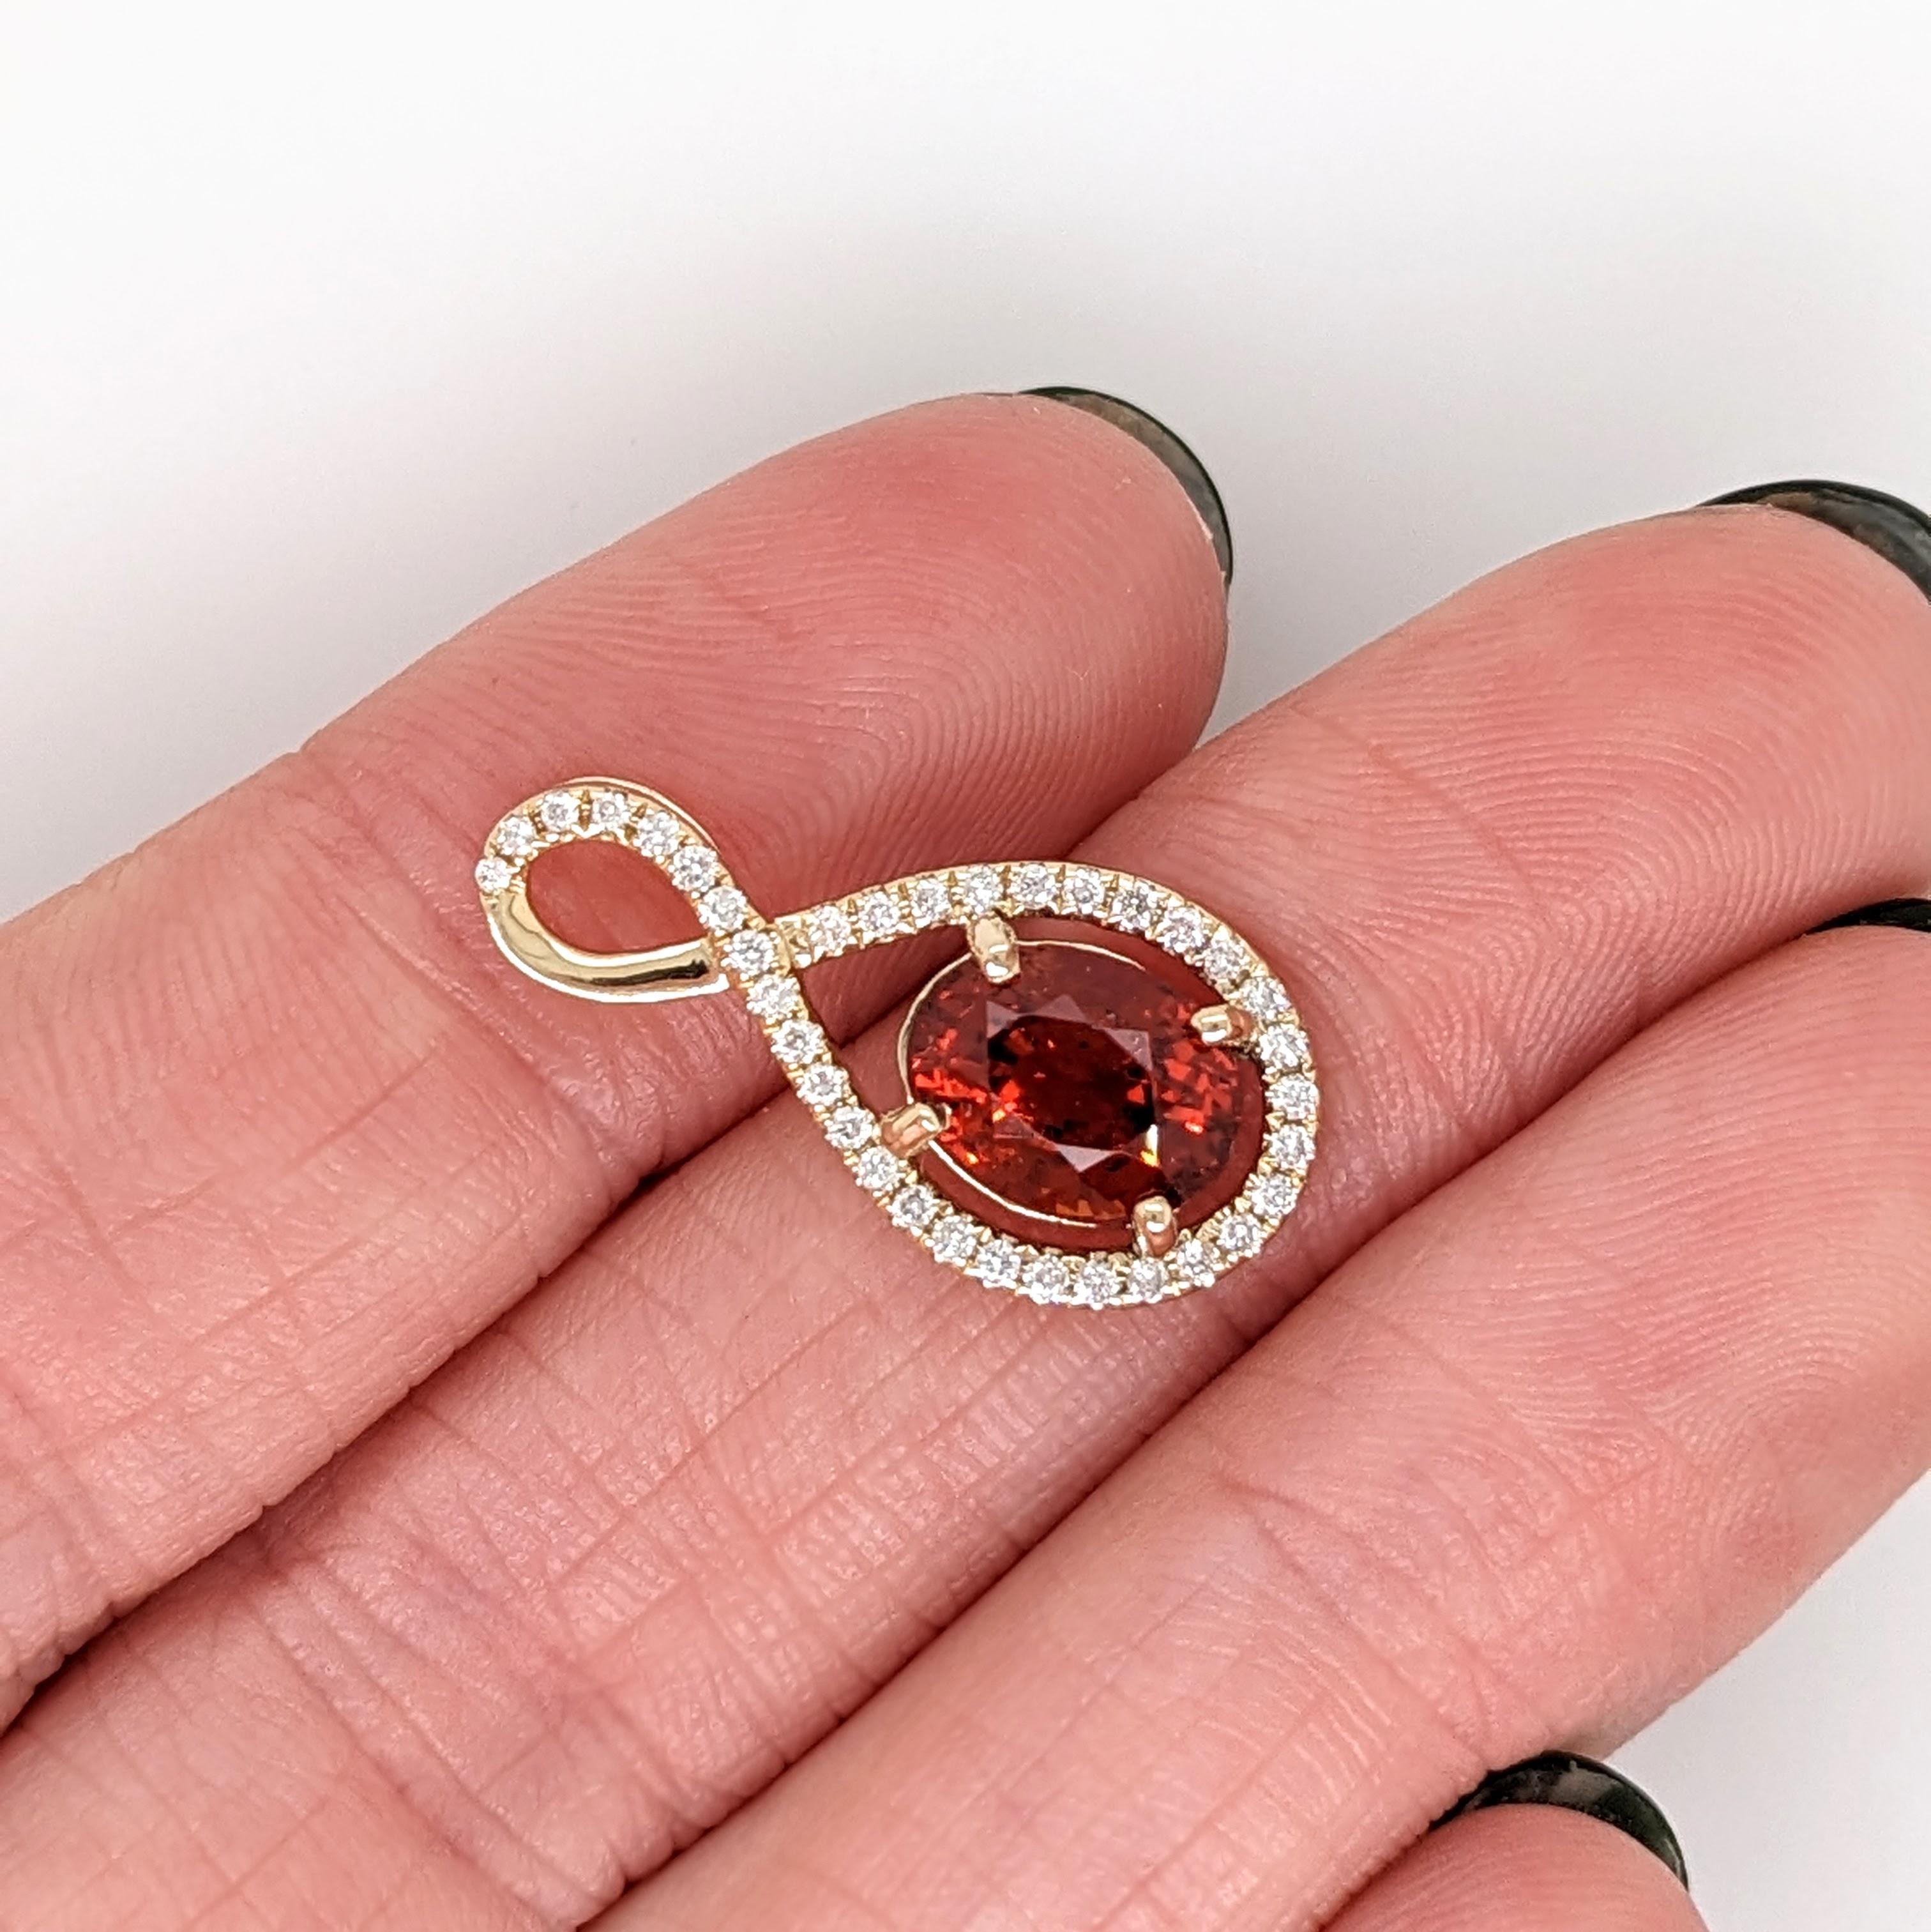 1.1ct Spessertine Garnet Pendant w Natural Diamonds in Solid 14K Yellow Gold In New Condition For Sale In Columbus, OH